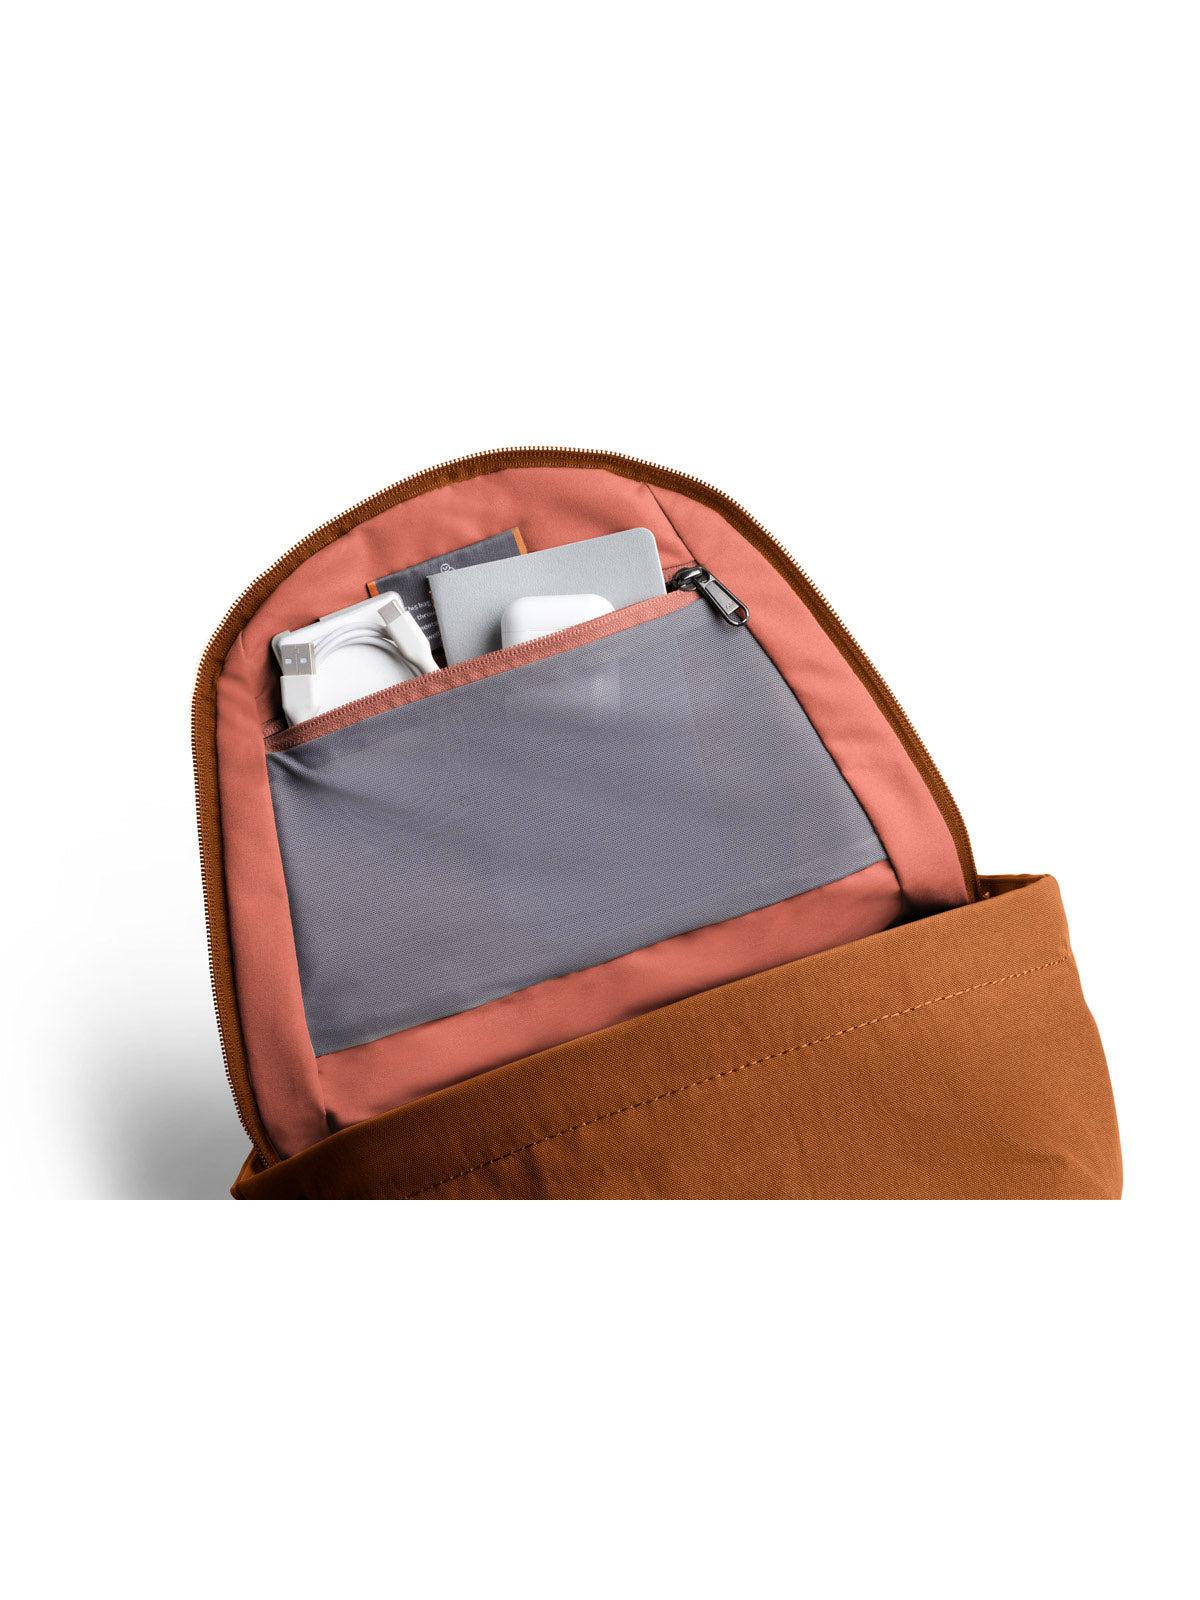 Bellroy Classic Backpack Compact Bronze